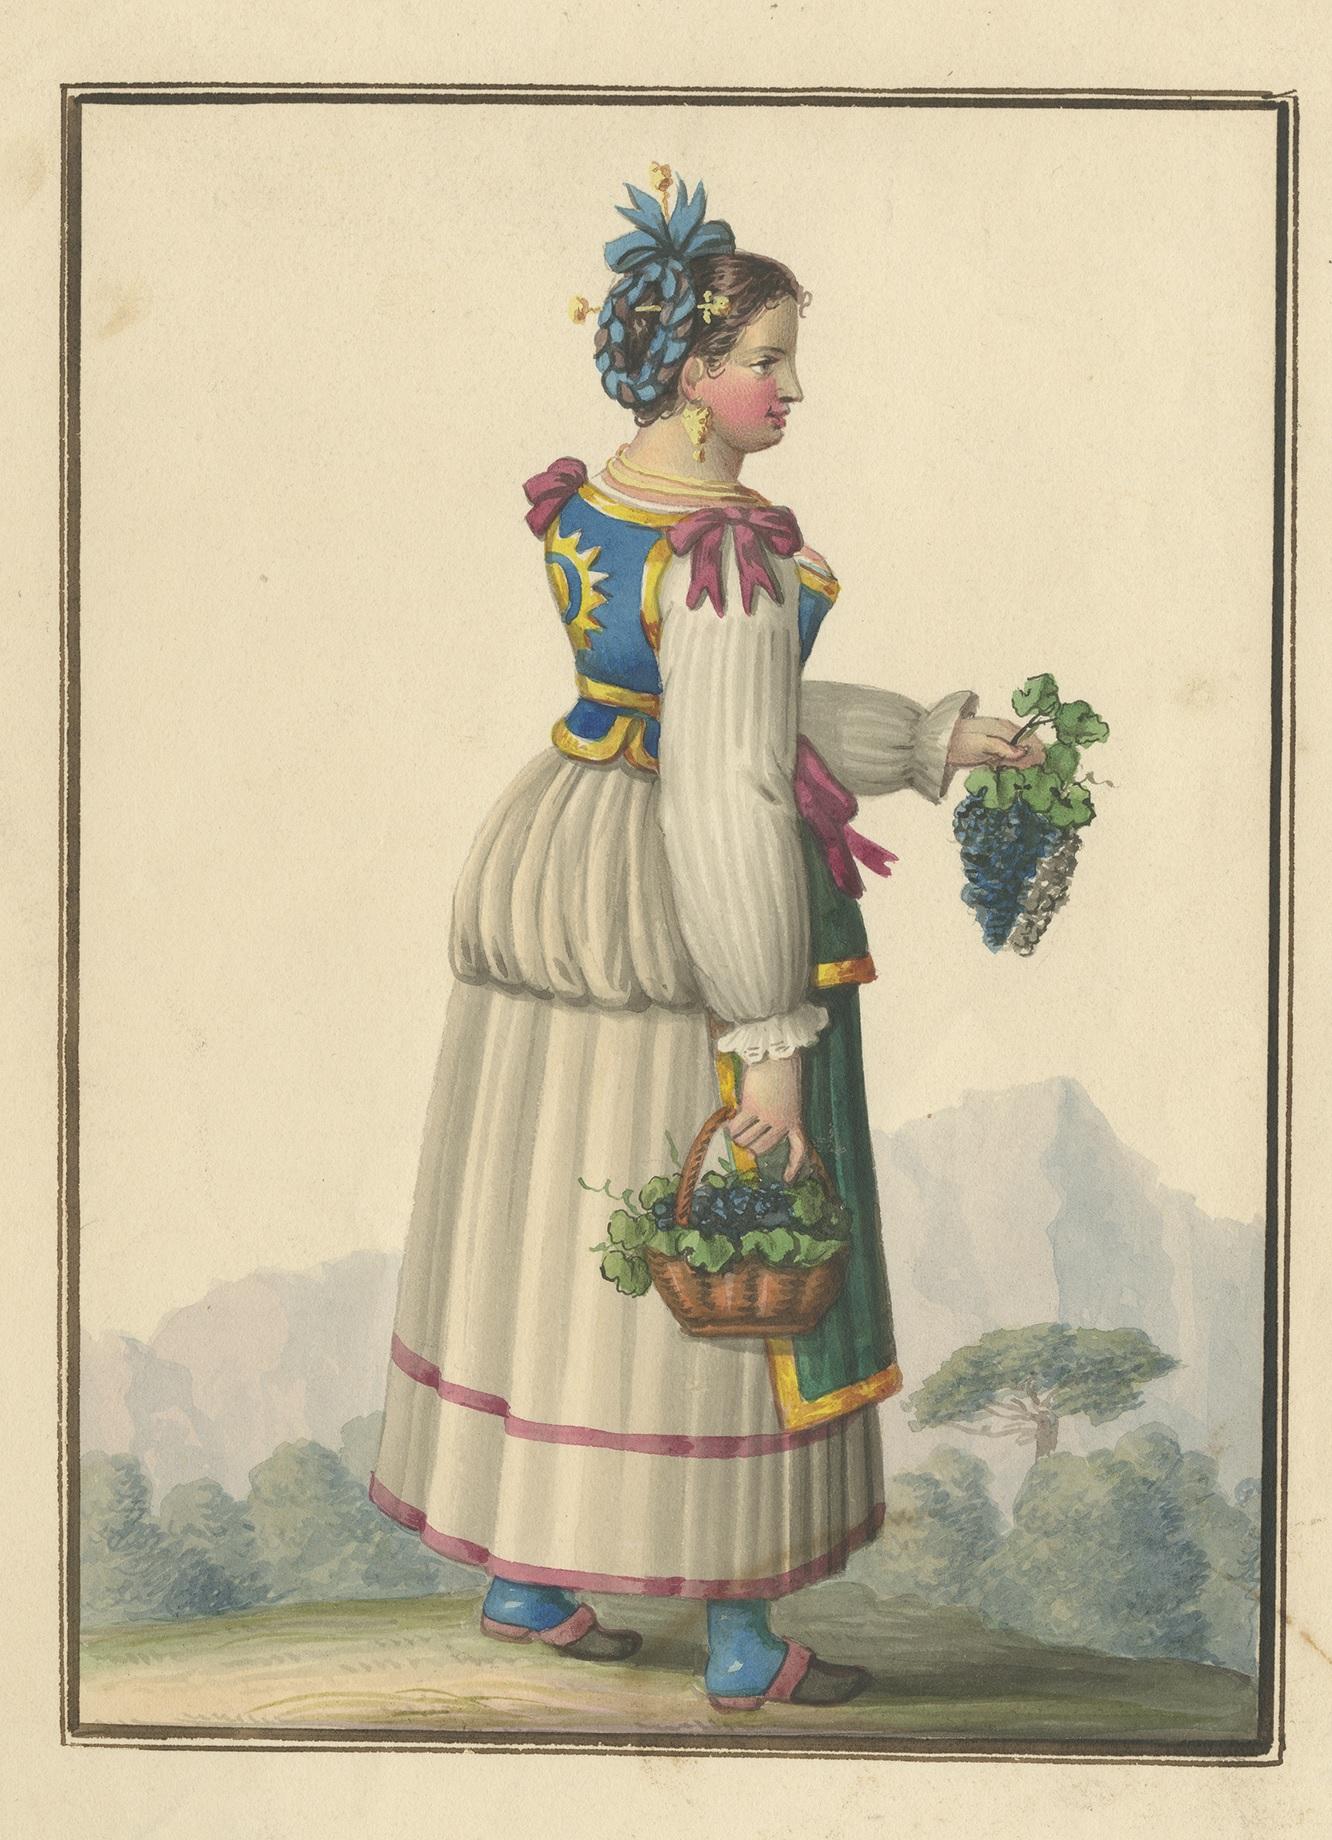 Antique print of a woman harvesting grapes. Source unknown, to be determined.